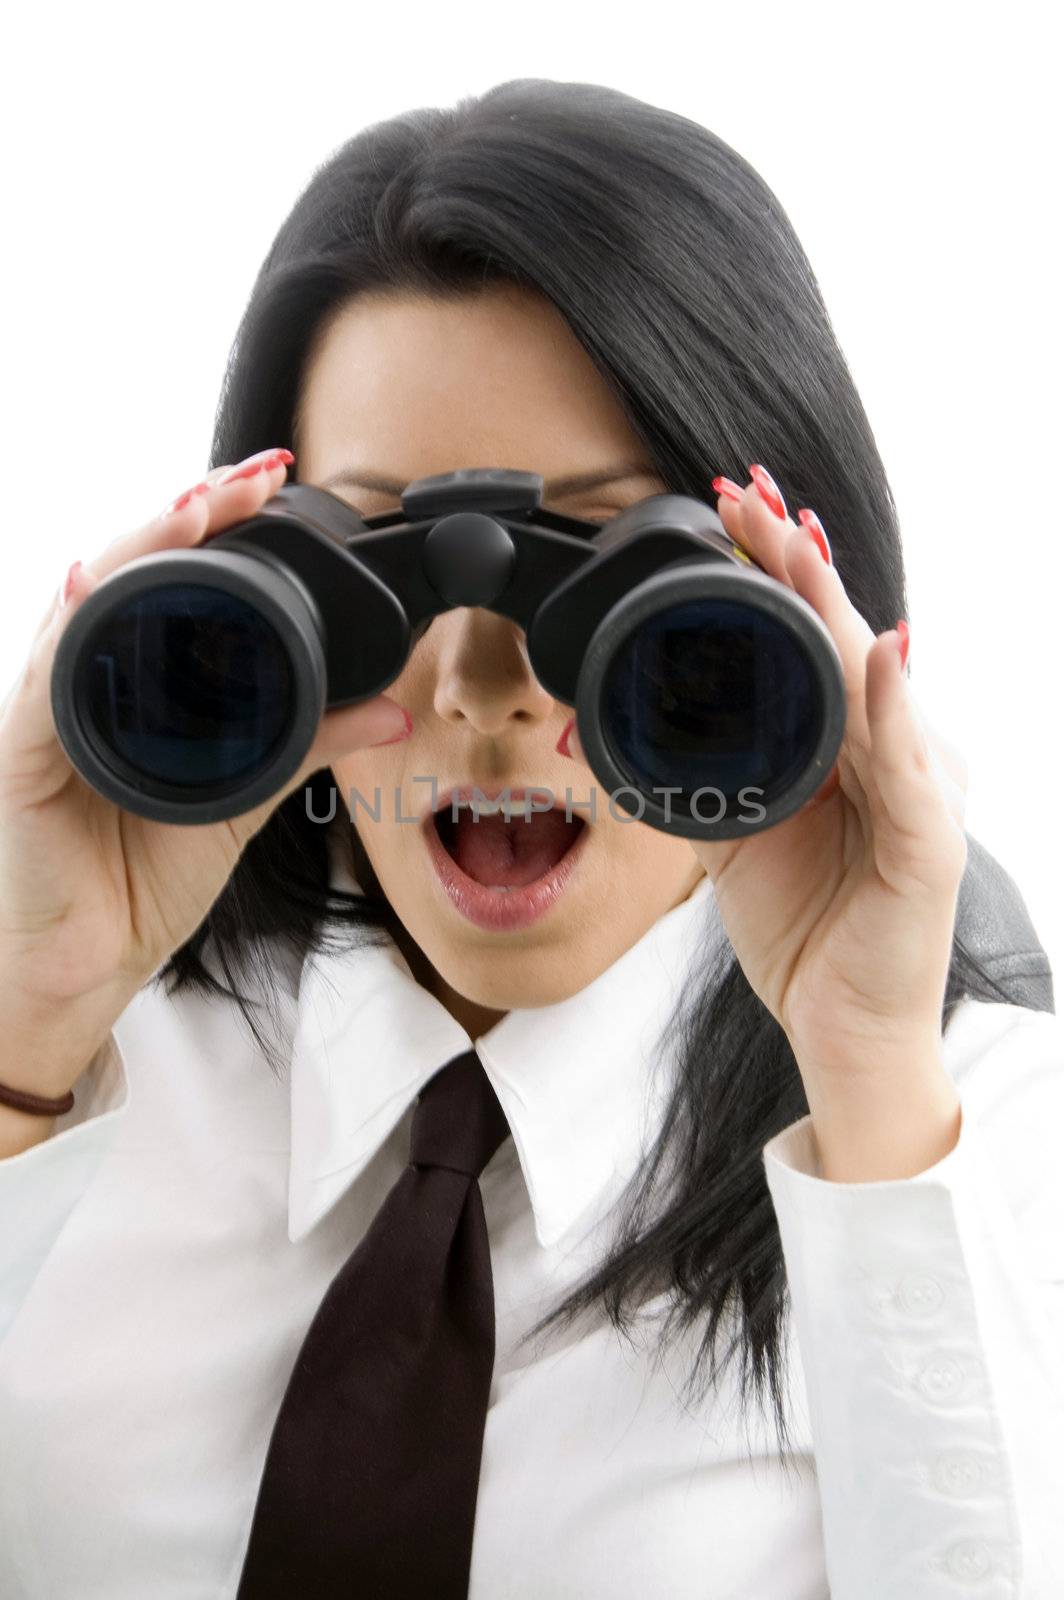 young accountant looking through binocular on an isolated background